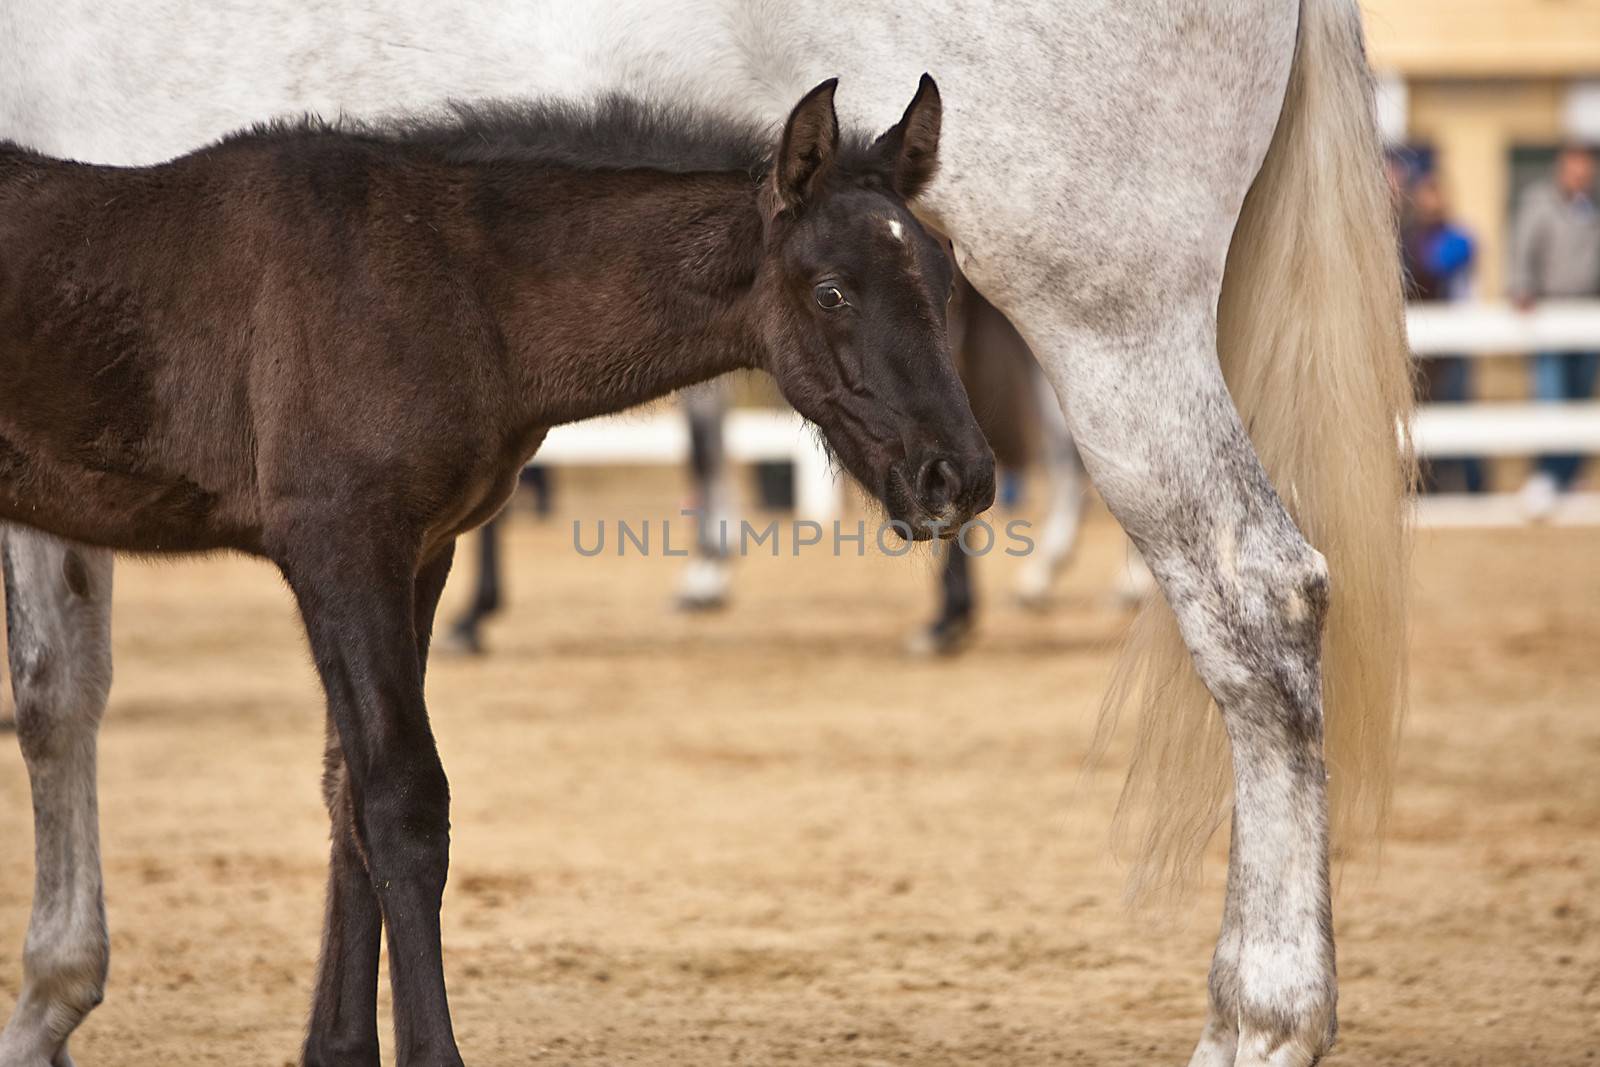 Mother horse and nursing baby, Spain